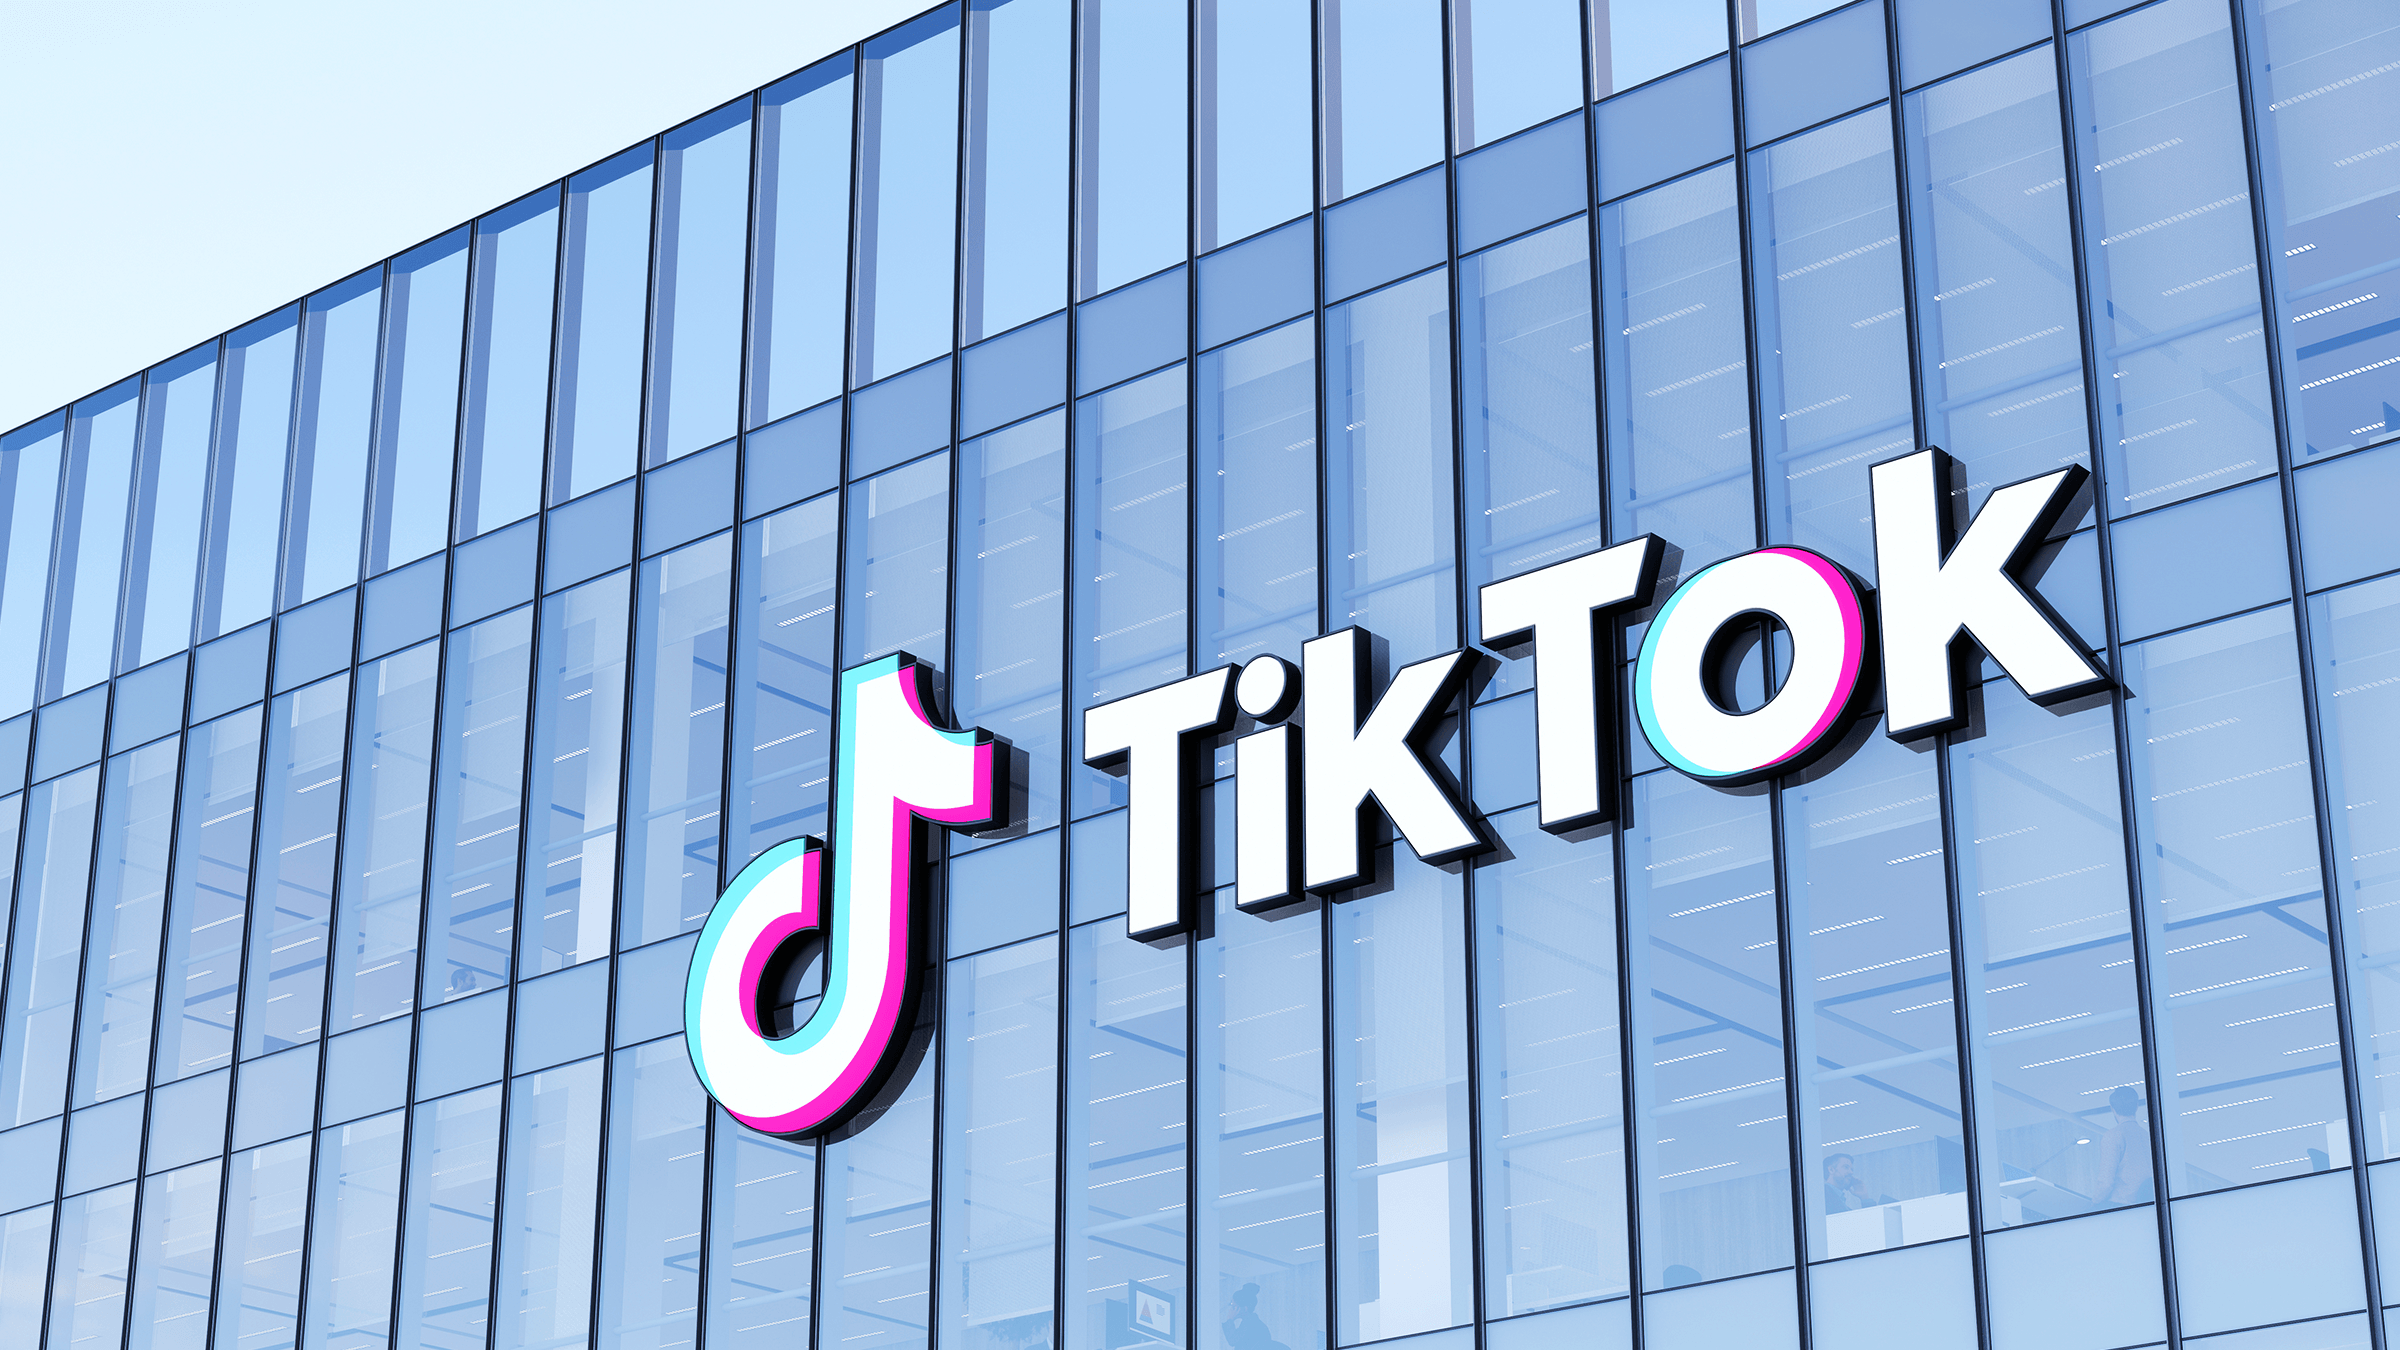 an image of the tiktok sign adorning a glass building